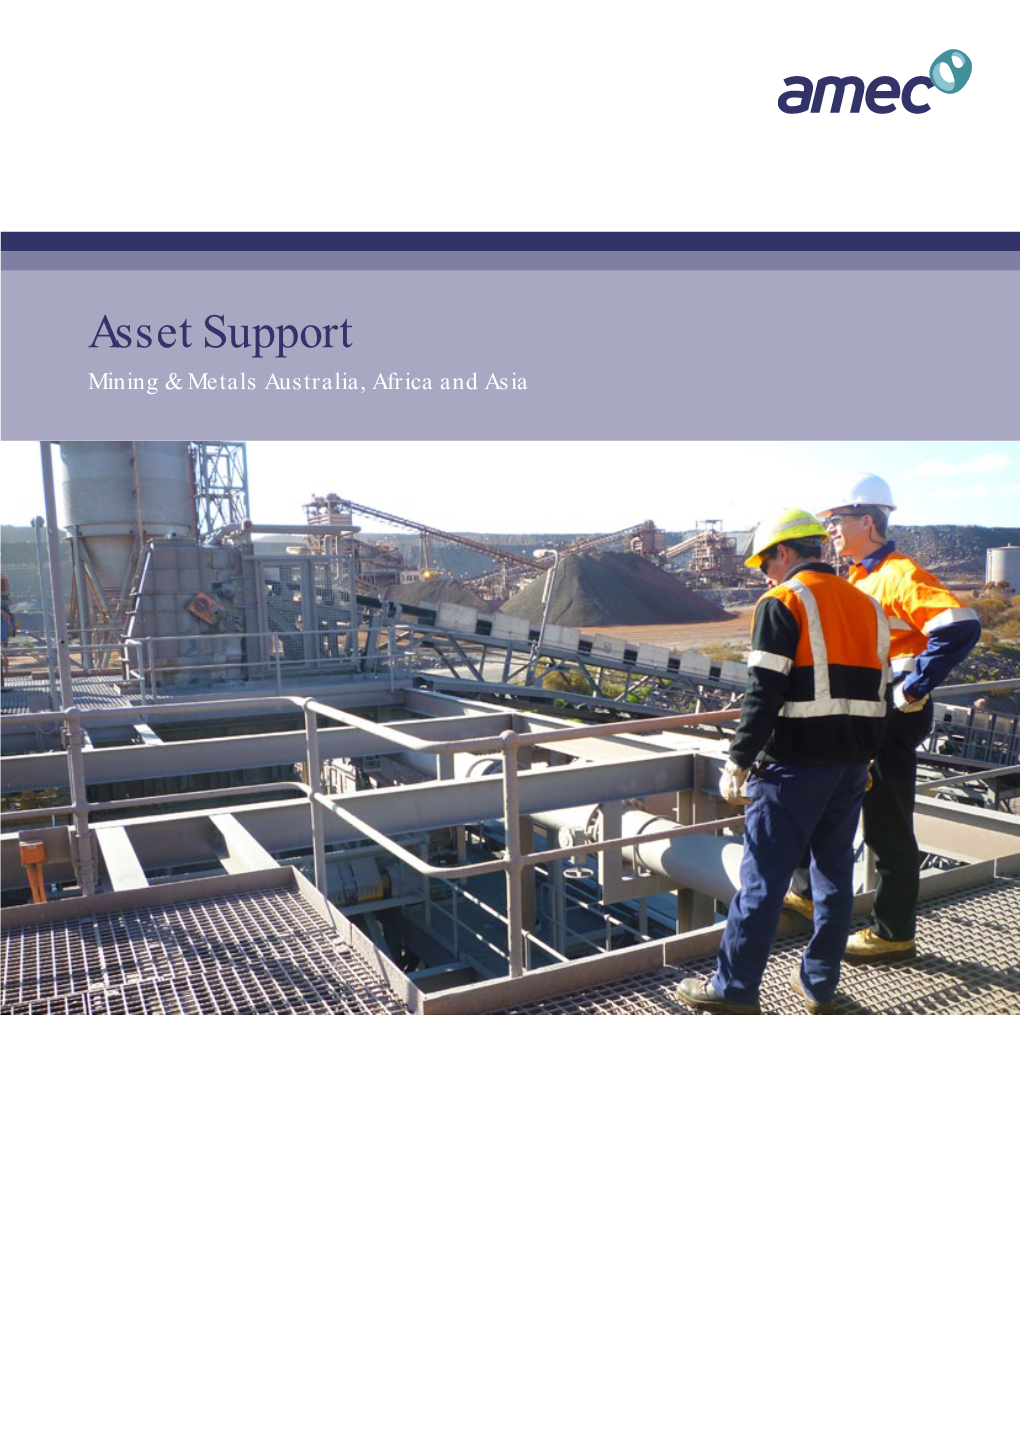 Asset Support Mining & Metals Australia, Africa and Asia Company Overview